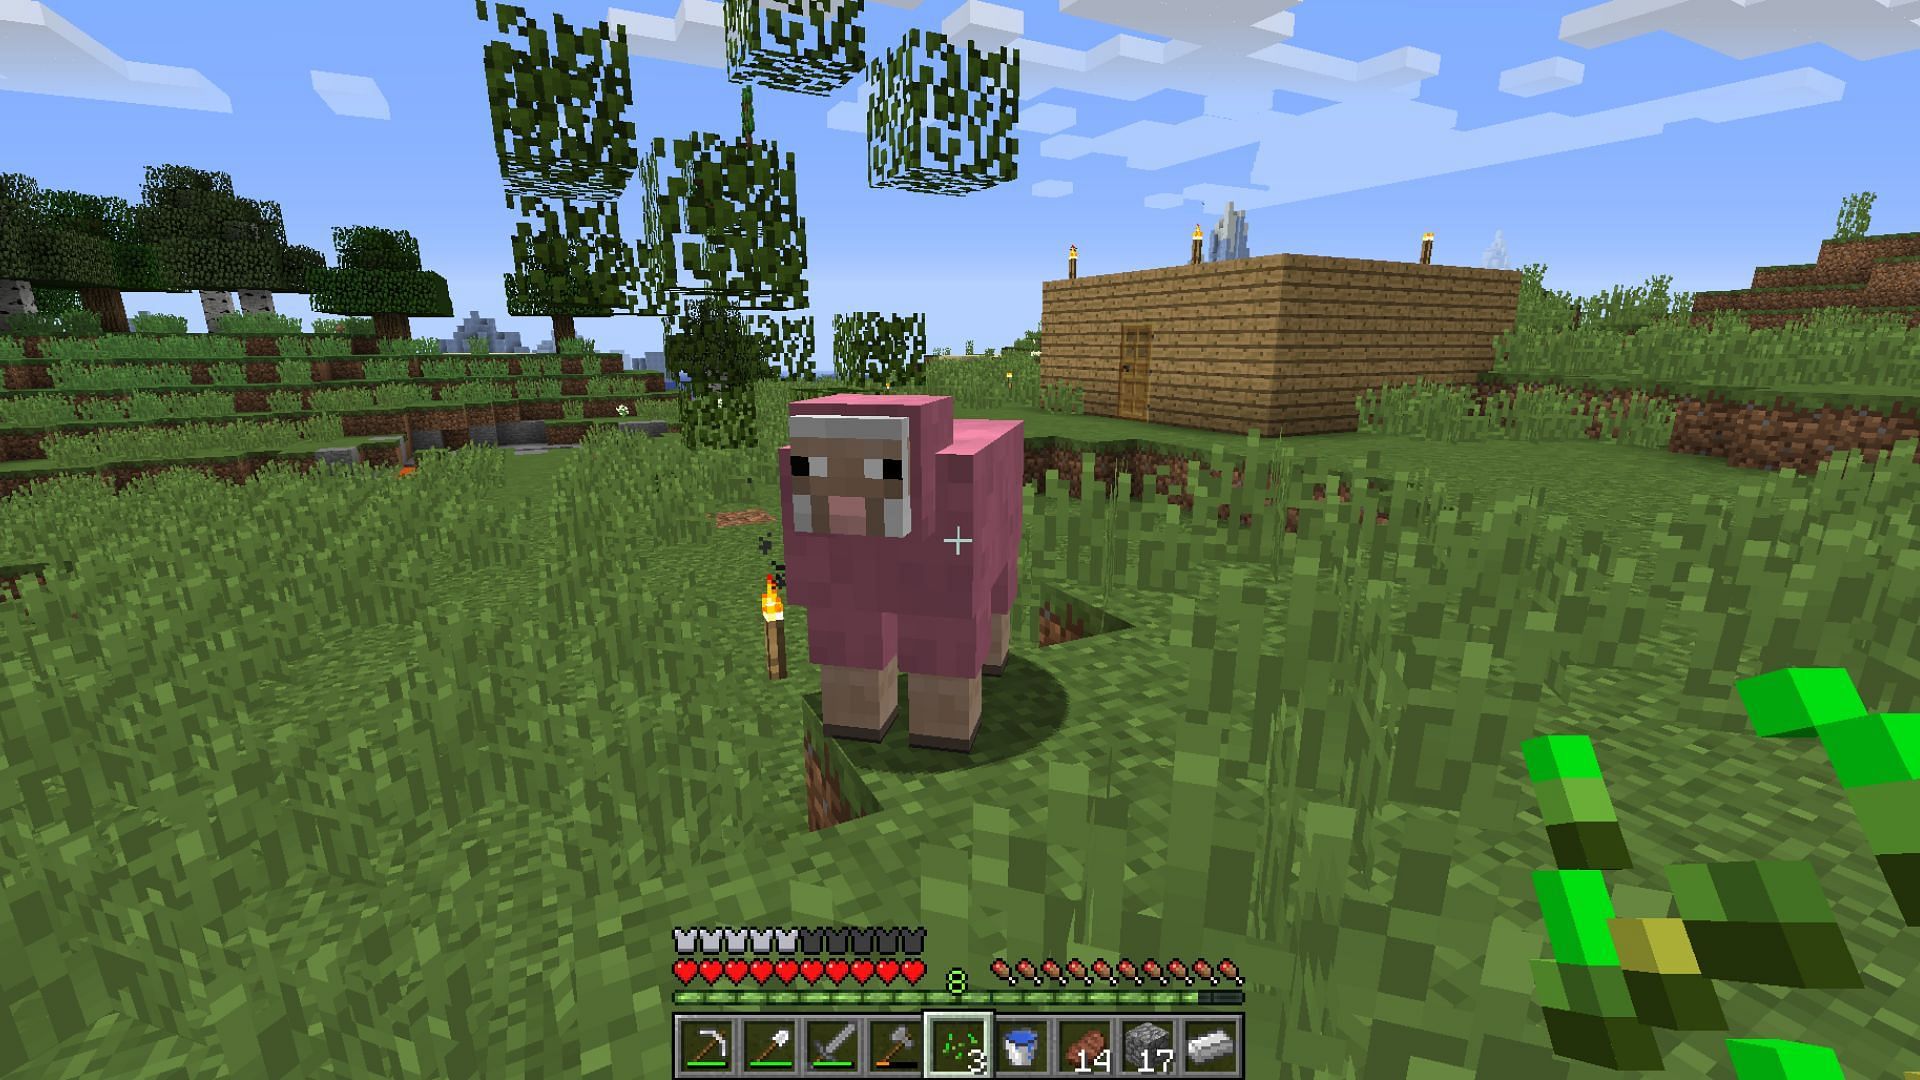 Pink sheep is the rarest variant of one of the most commonmobsb in Minecraft (Image via Reddit / u/kr580)